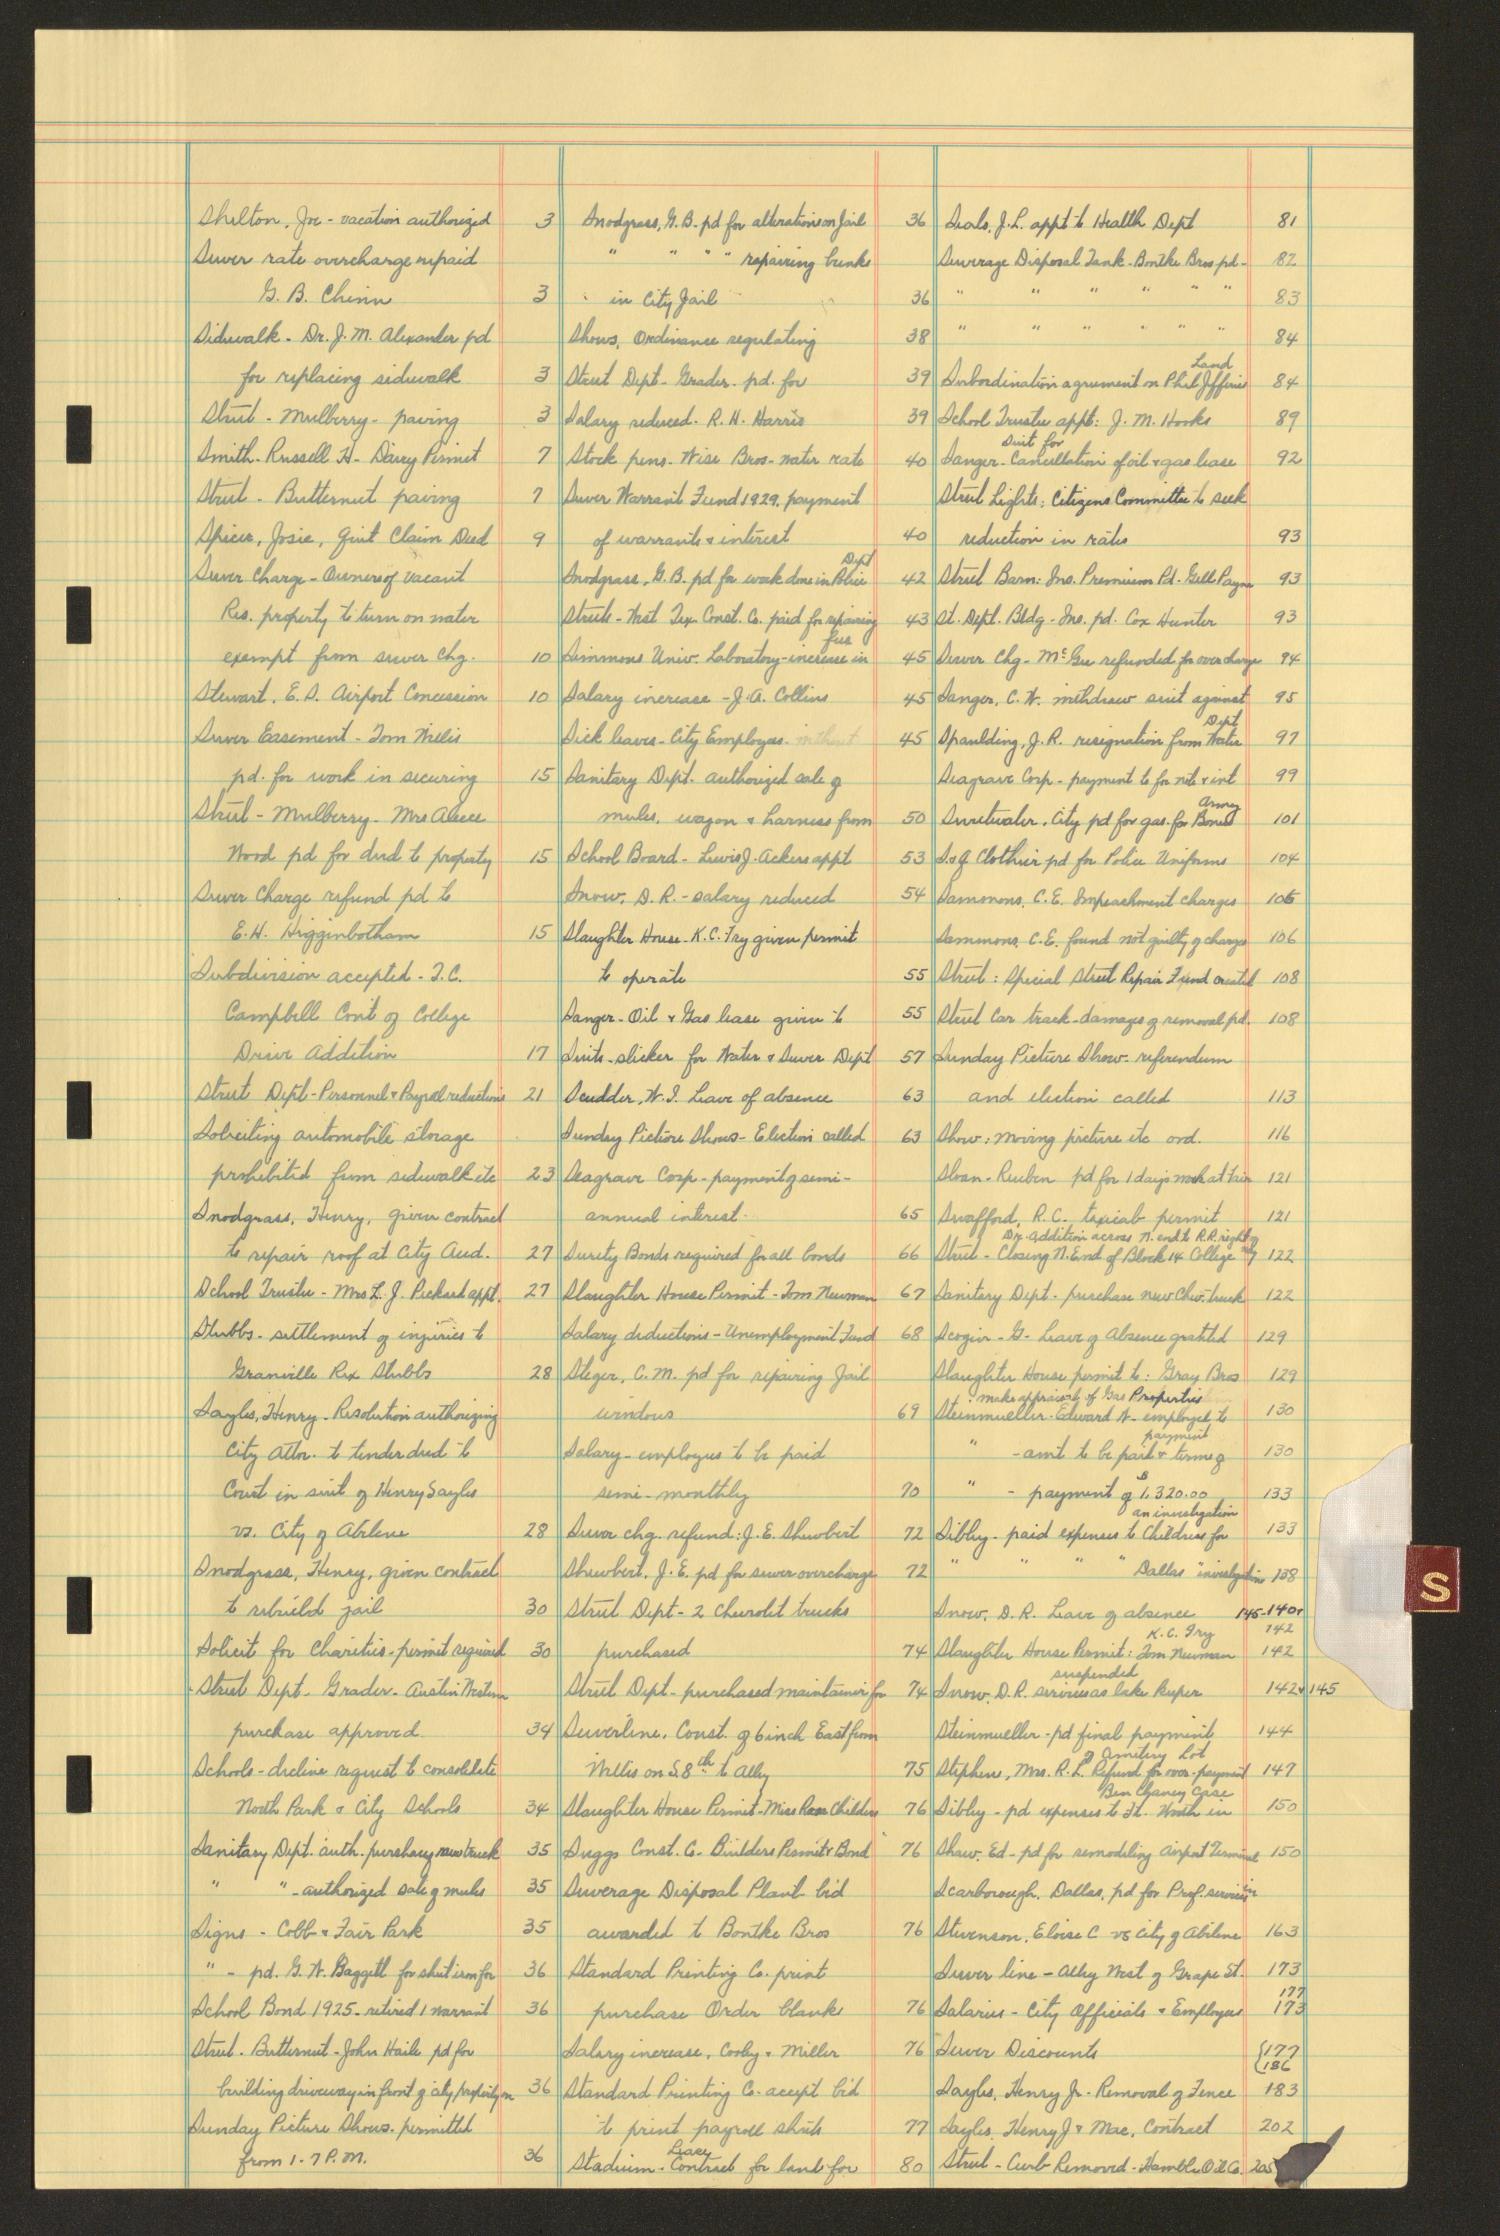 [Abilene Board of Commissioners Minutes: 1931-1938]
                                                
                                                    S
                                                